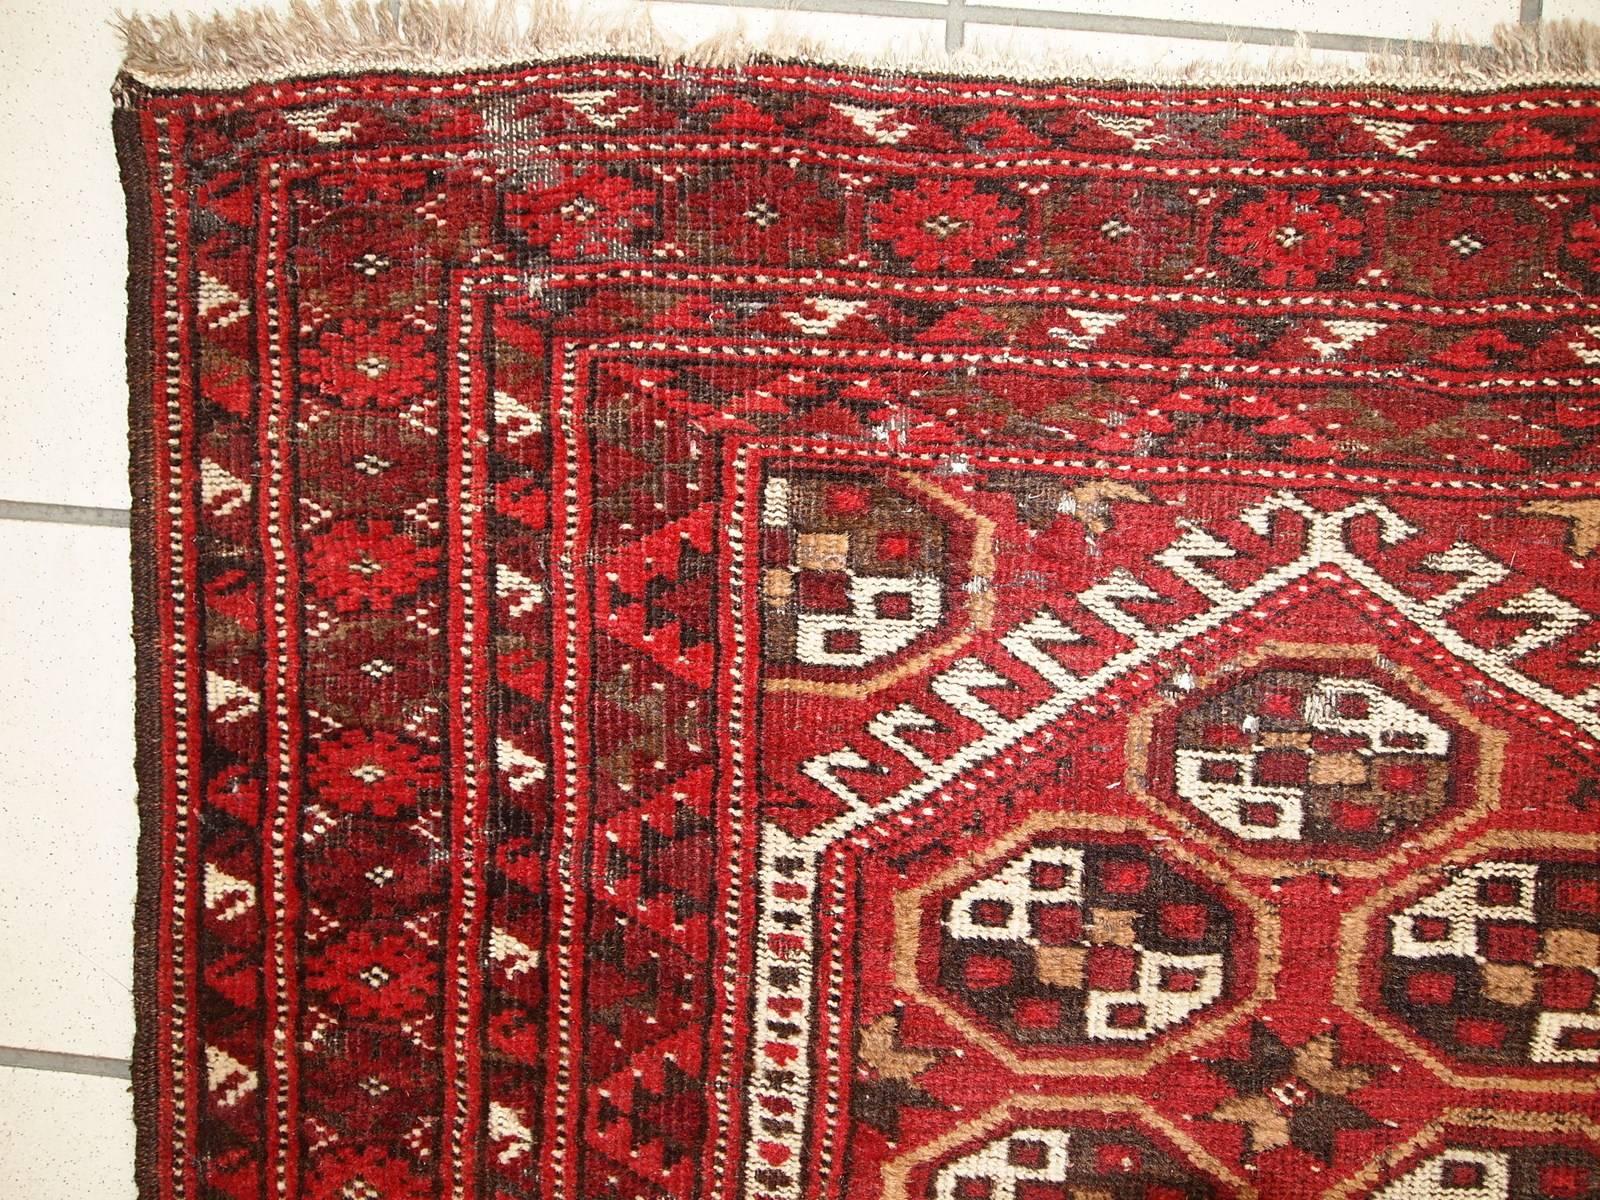 Antique Afghan Adraskand rug in original condition. The rug is in traditional colors of red, white and brown shade. The rug is prayer. Condition is original, has some moth damages. The rug is quite thin and light.